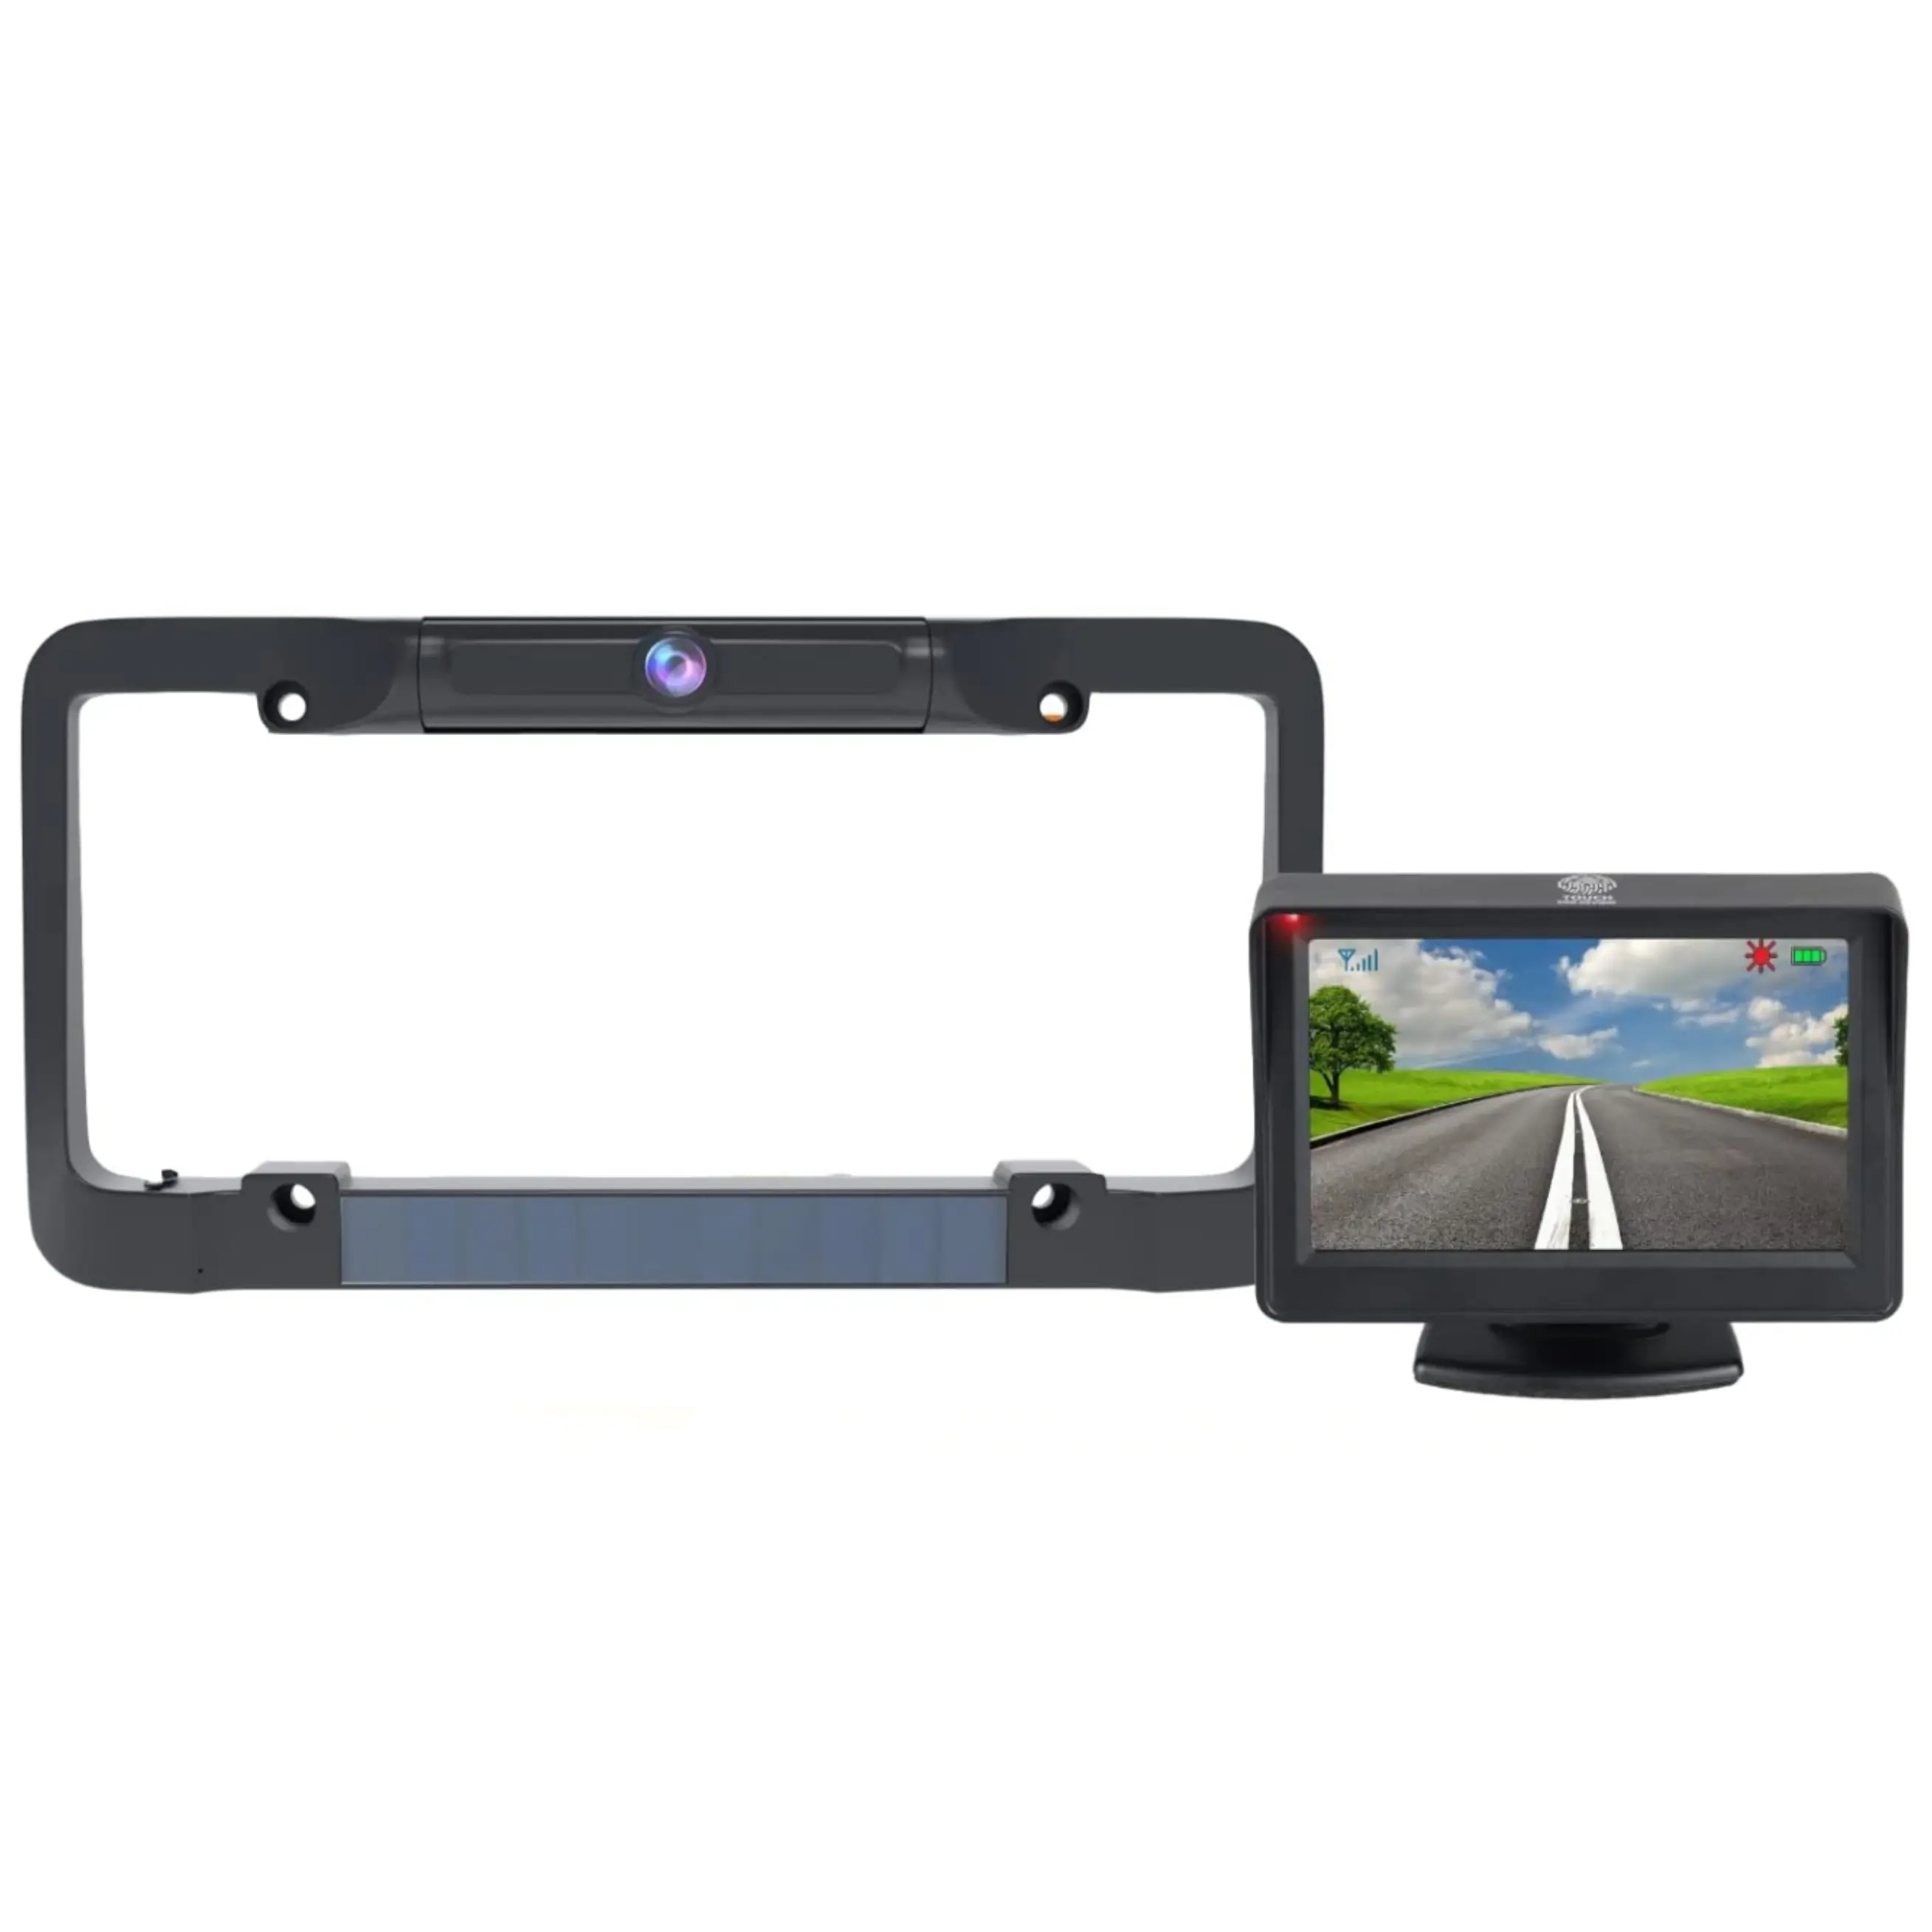 Wireless Solar Powered Backup Camera System with 4.3'' Color Dash Monitor and License Plate Frame for Cars, Trucks and SUV's